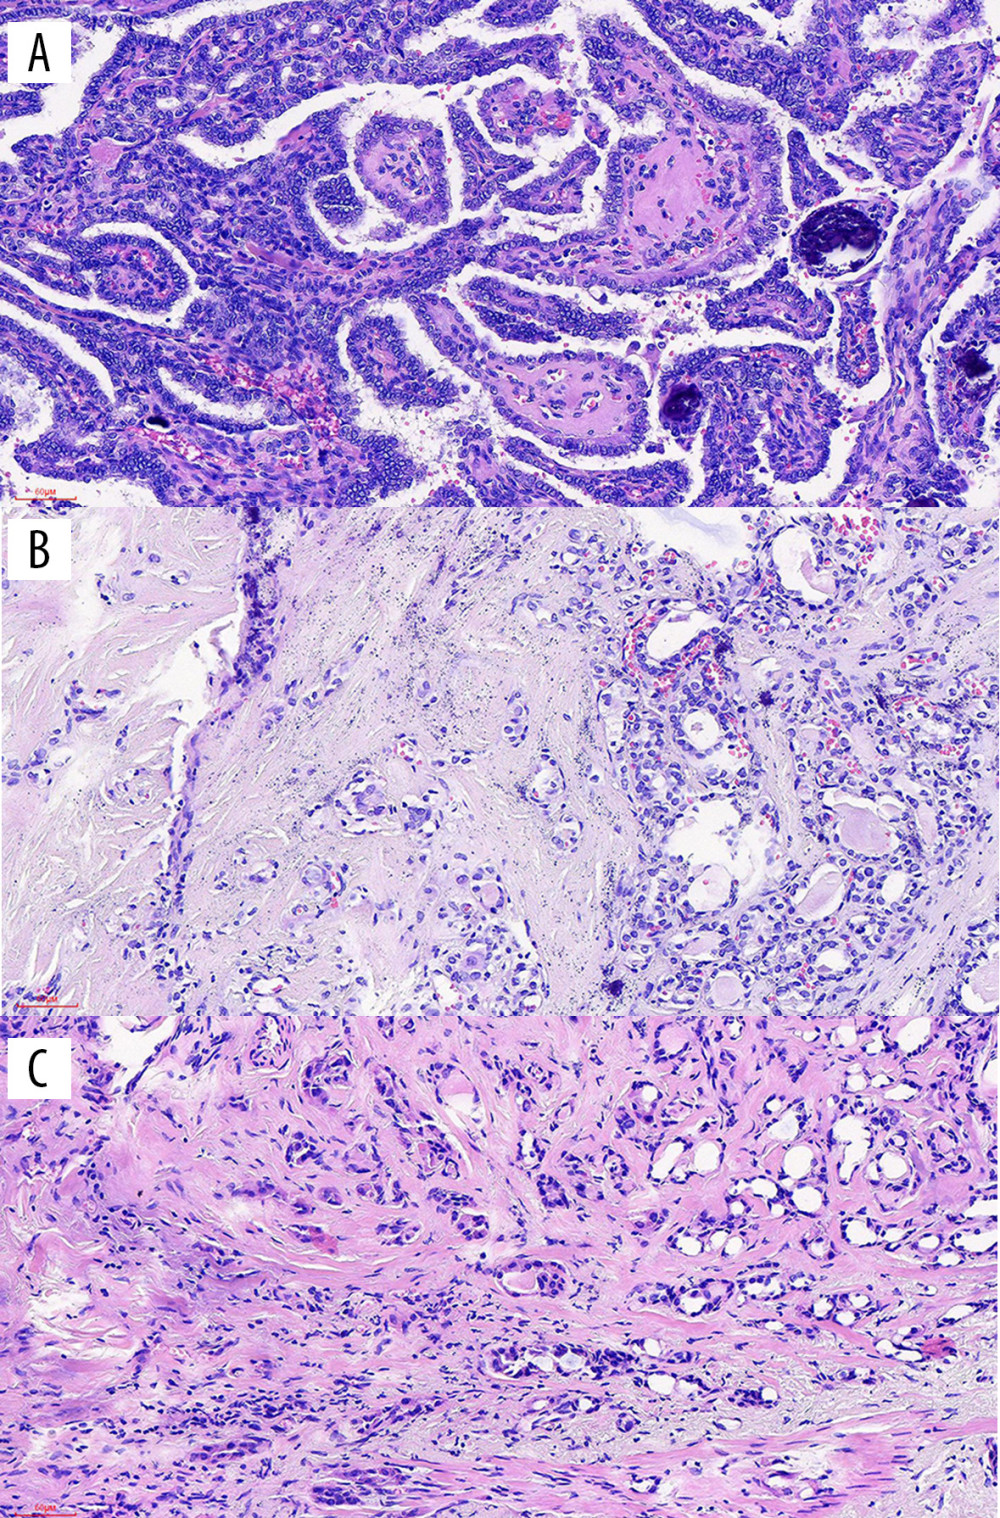 (A–C) Photomicrographs of the histopathology of a well-circumscribed papillary thyroid microcarcinoma (PTMC) measuring less than 10 mm in the thyroid isthmus showing cuboidal and columnar cells, some with nuclear inclusions and nuclear grooves, and few mitoses. Hematoxylin and eosin (H&E) ×200.